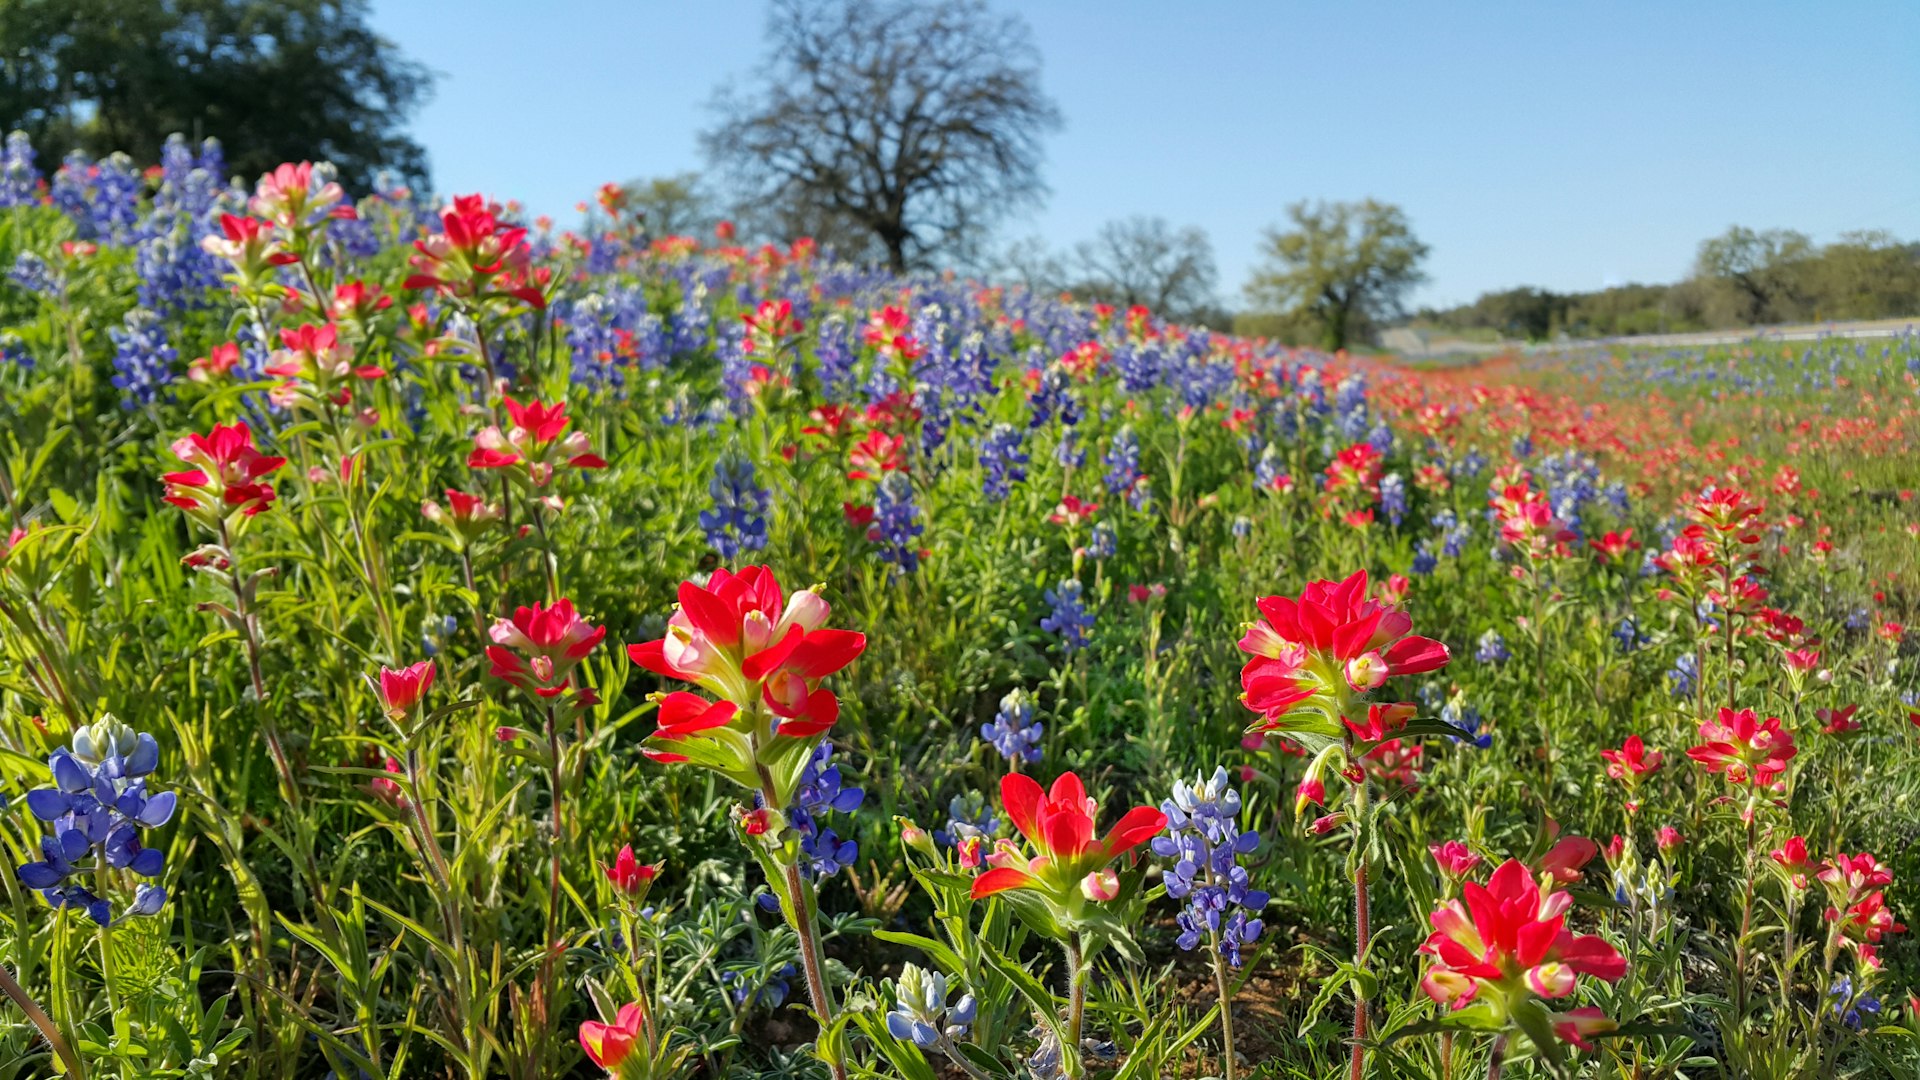 Colorful bluebonnets, Indian Paintbrushes and other wildflowers in Texas Hill Country